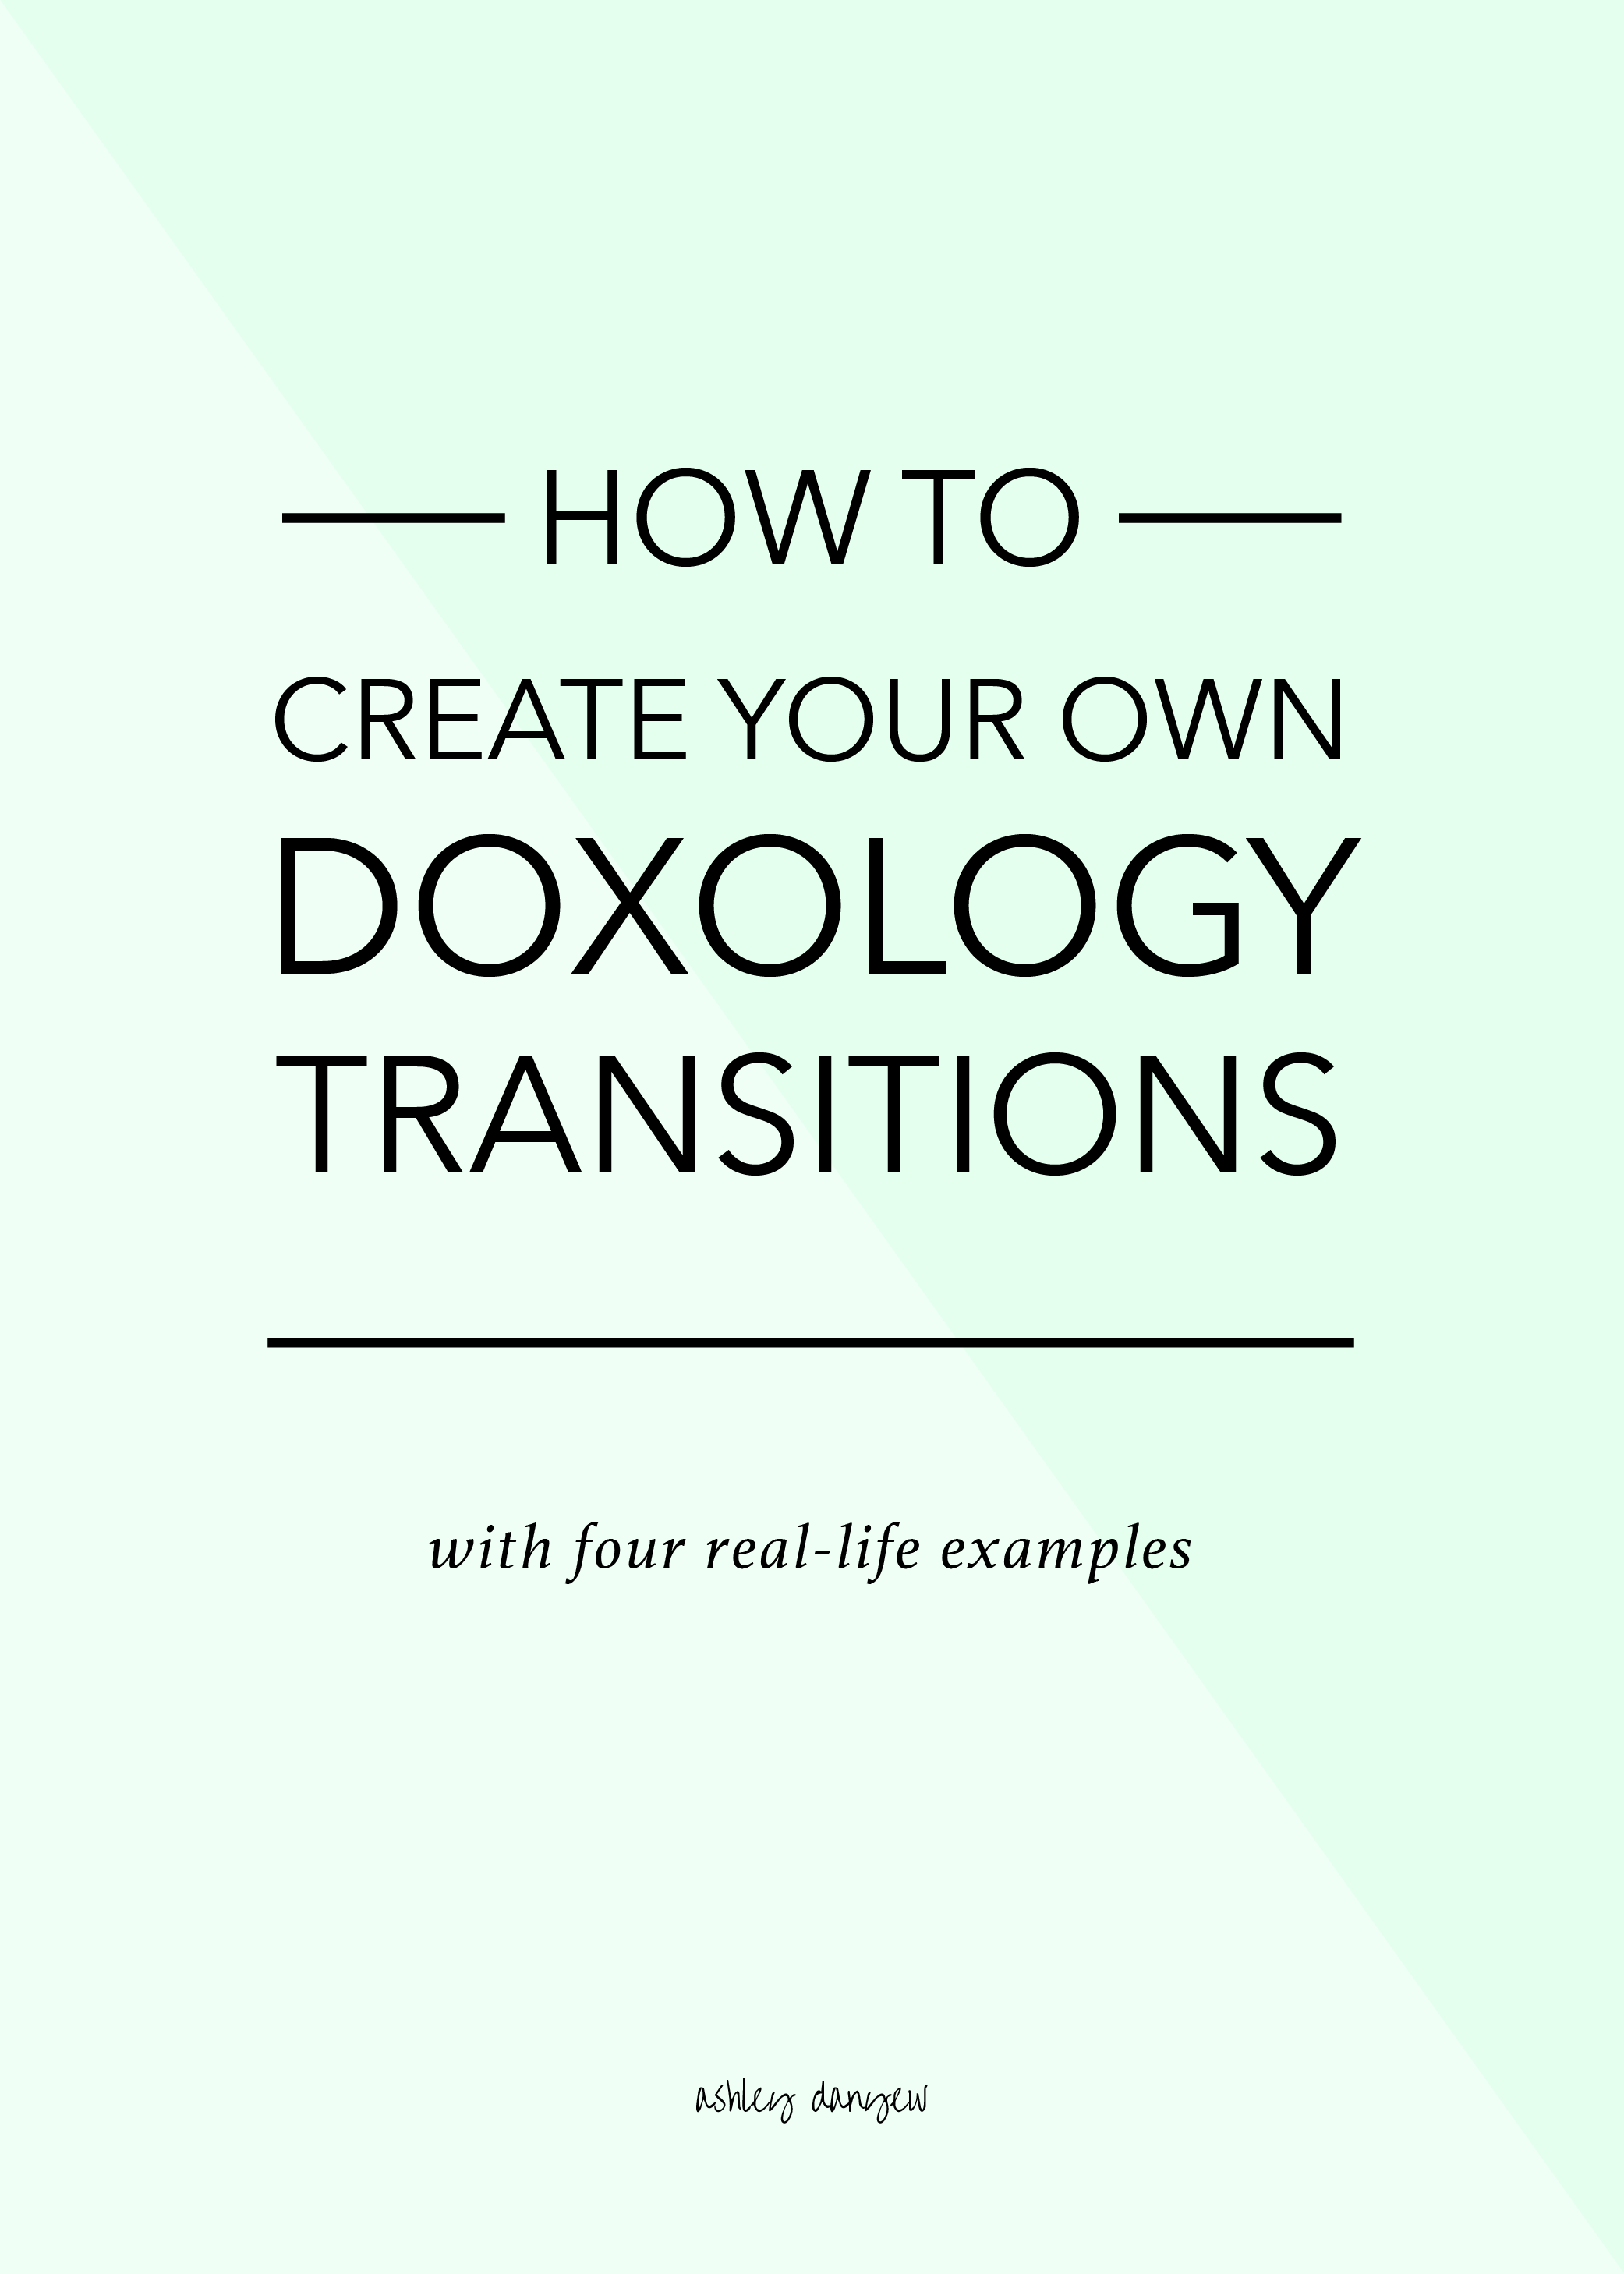 Copy of How to Create Your Own Doxology Transitions